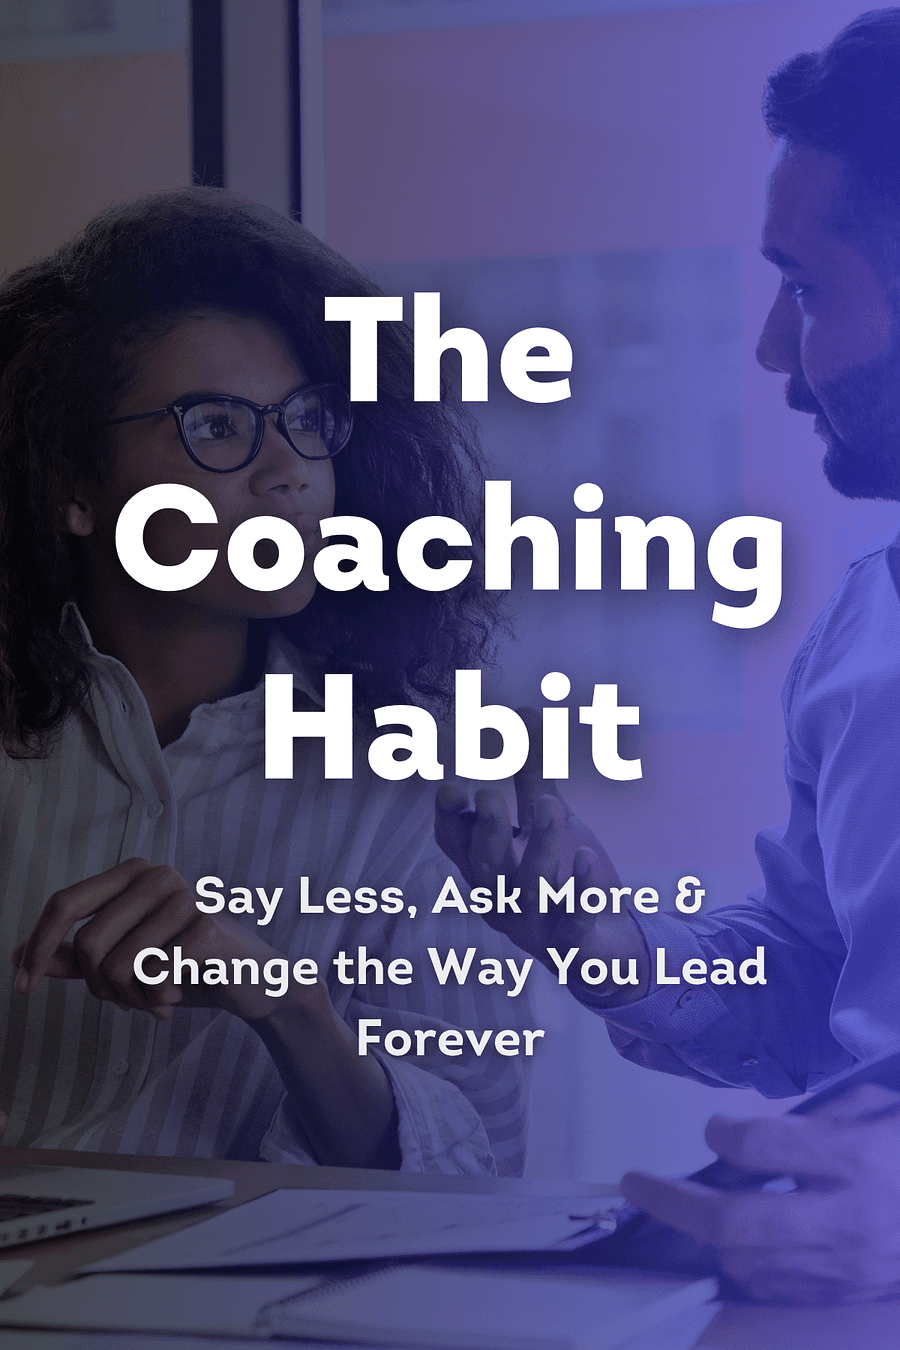 The Coaching Habit by Michael Bungay Stanier - Book Summary